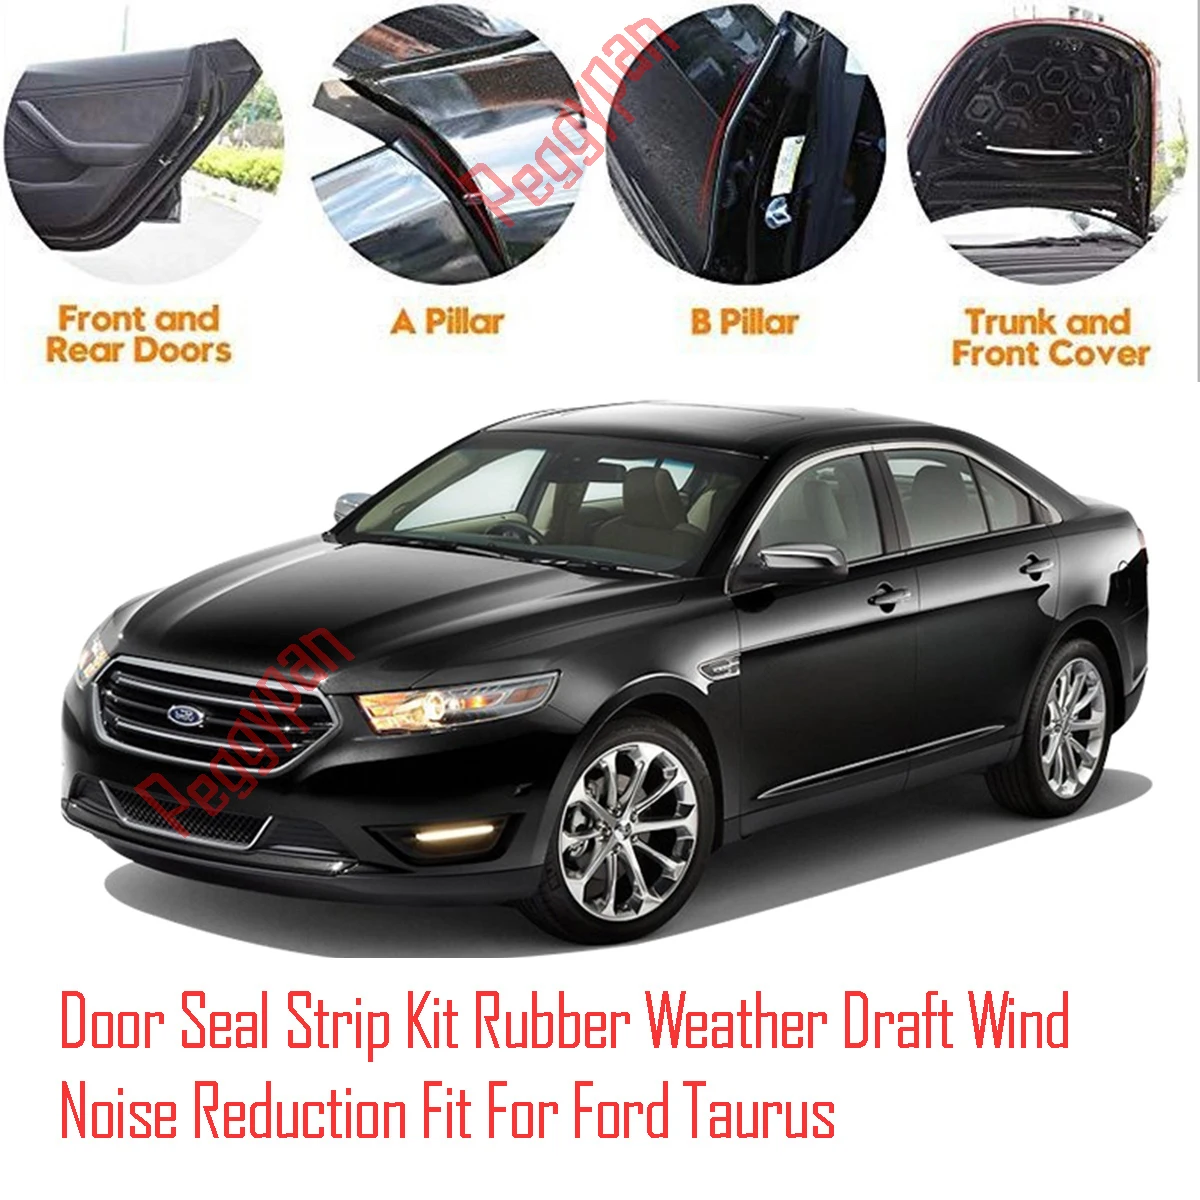 Door Seal Strip Kit Self Adhesive Window Engine Cover Soundproof Rubber Weather Draft Wind Noise Reduction Fit For Ford Taurus